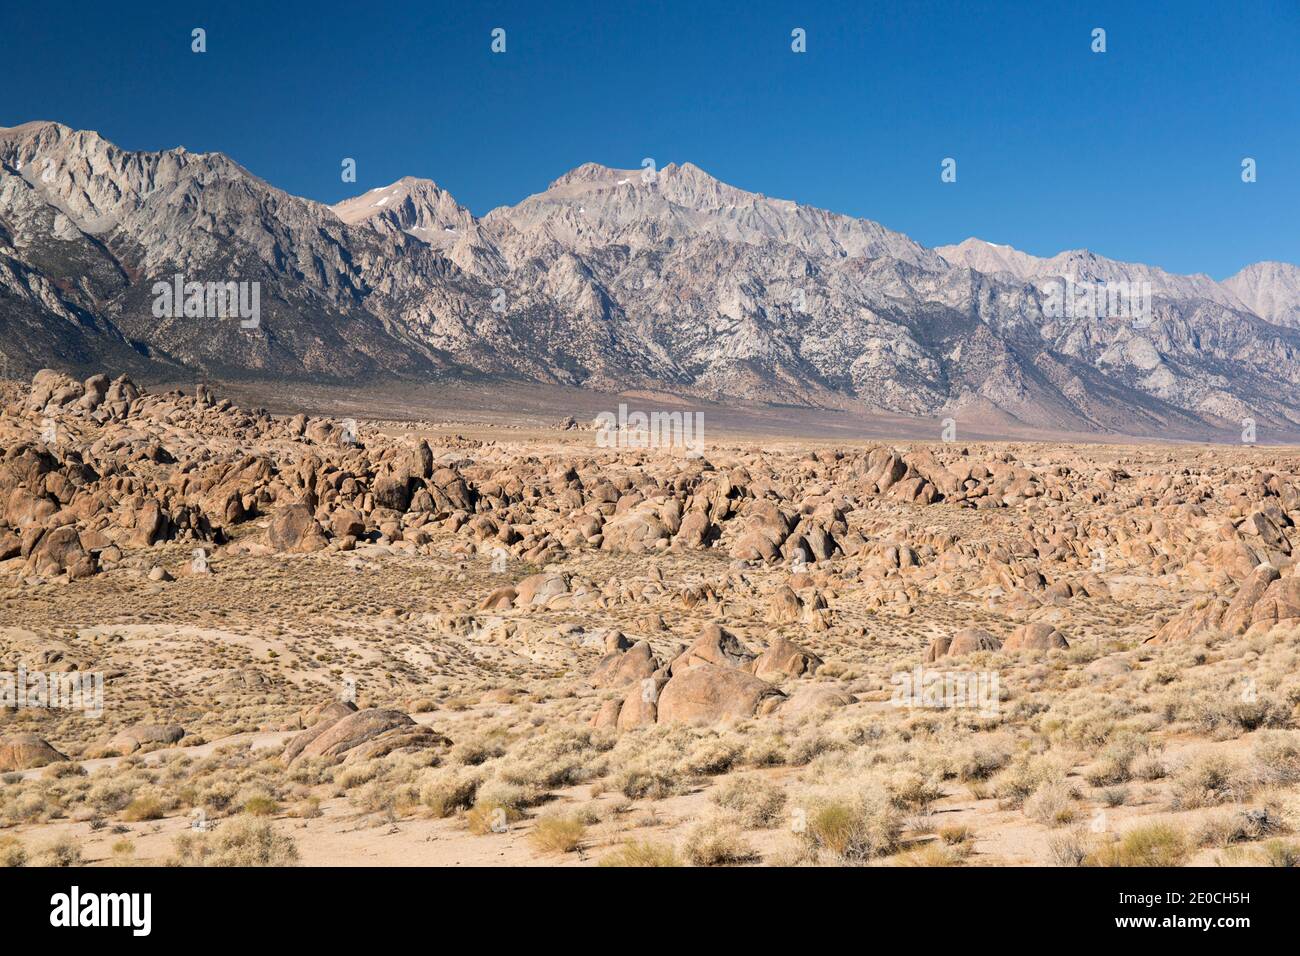 View across rocks to Mount Williamson and the Sierra Nevada, Alabama Hills National Scenic Area, Lone Pine, California, United States of America Stock Photo